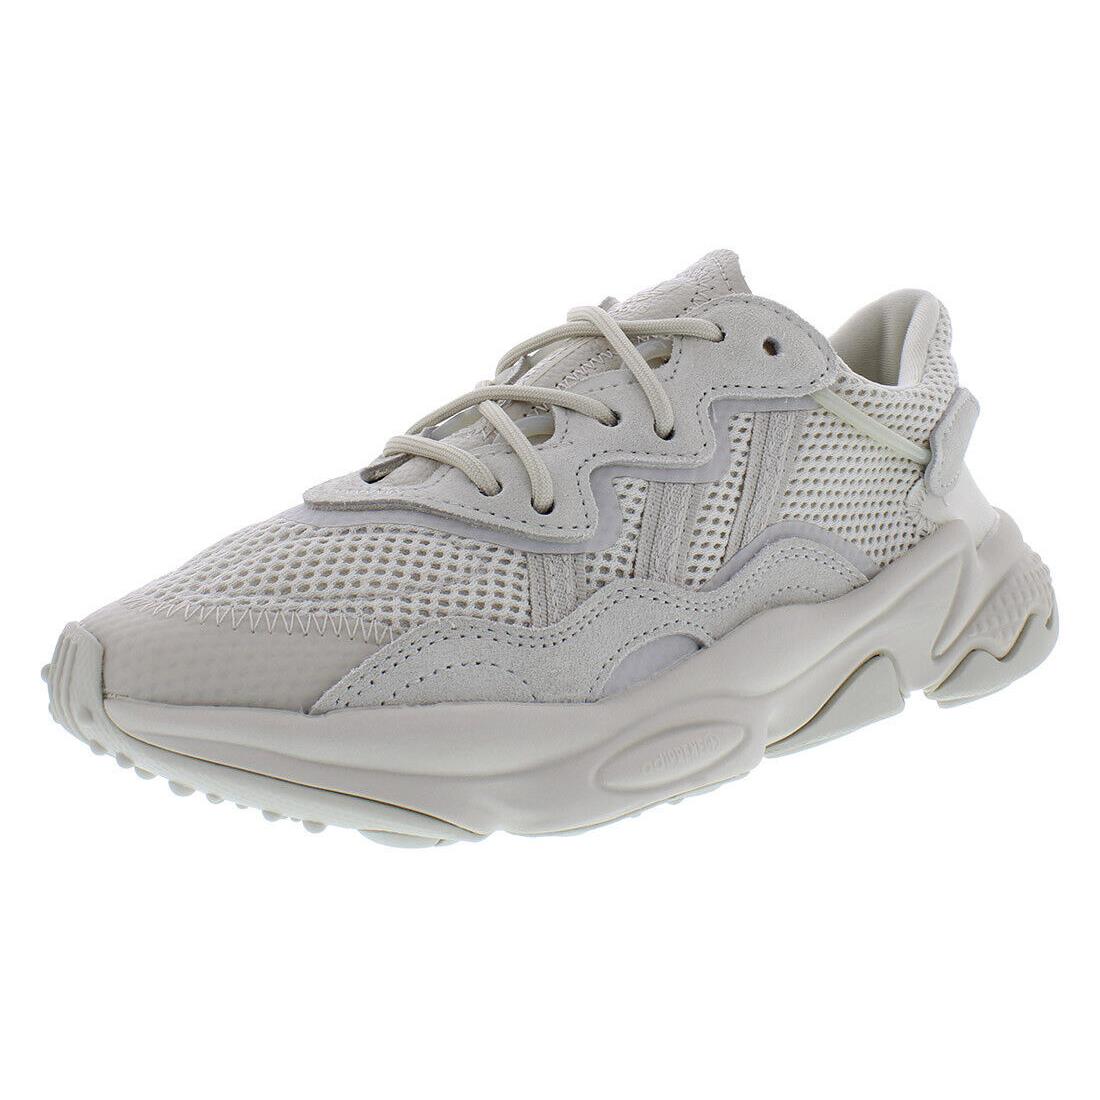 Adidas Ozweego Womens Shoes Size 9 Color: Taupe - Taupe, Main: Beige